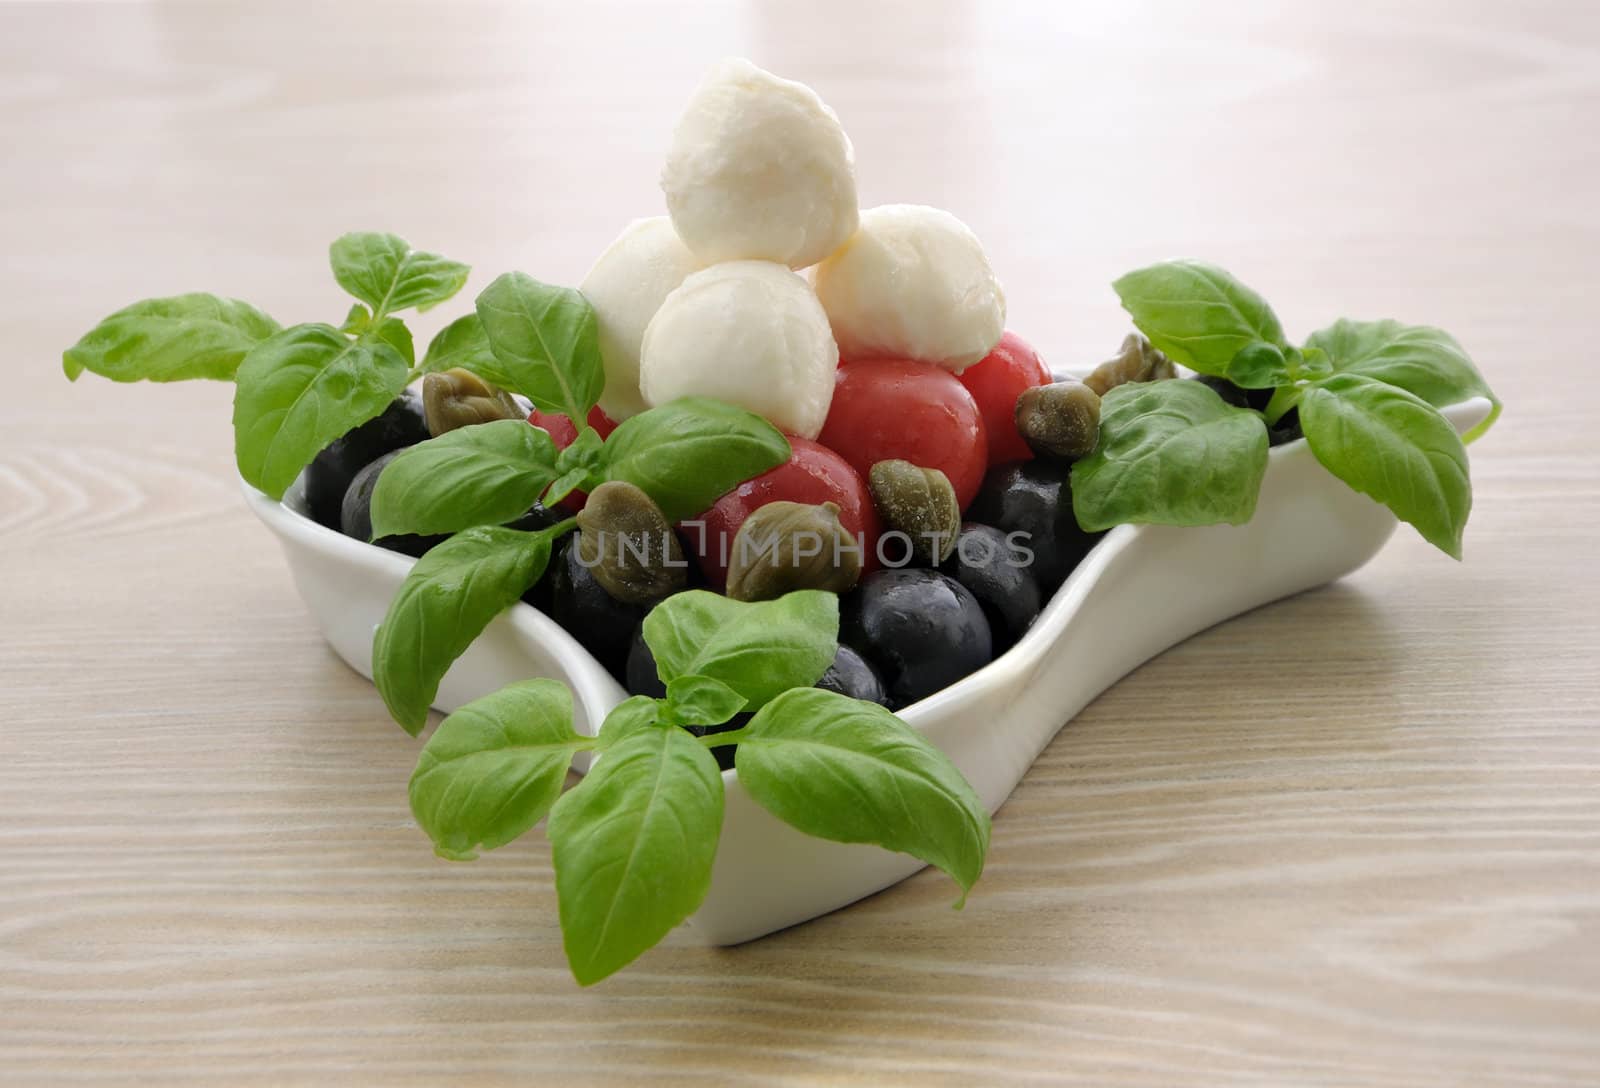 Appetizer of mozzarella, cherry tomatoes and olives and basil by Apolonia